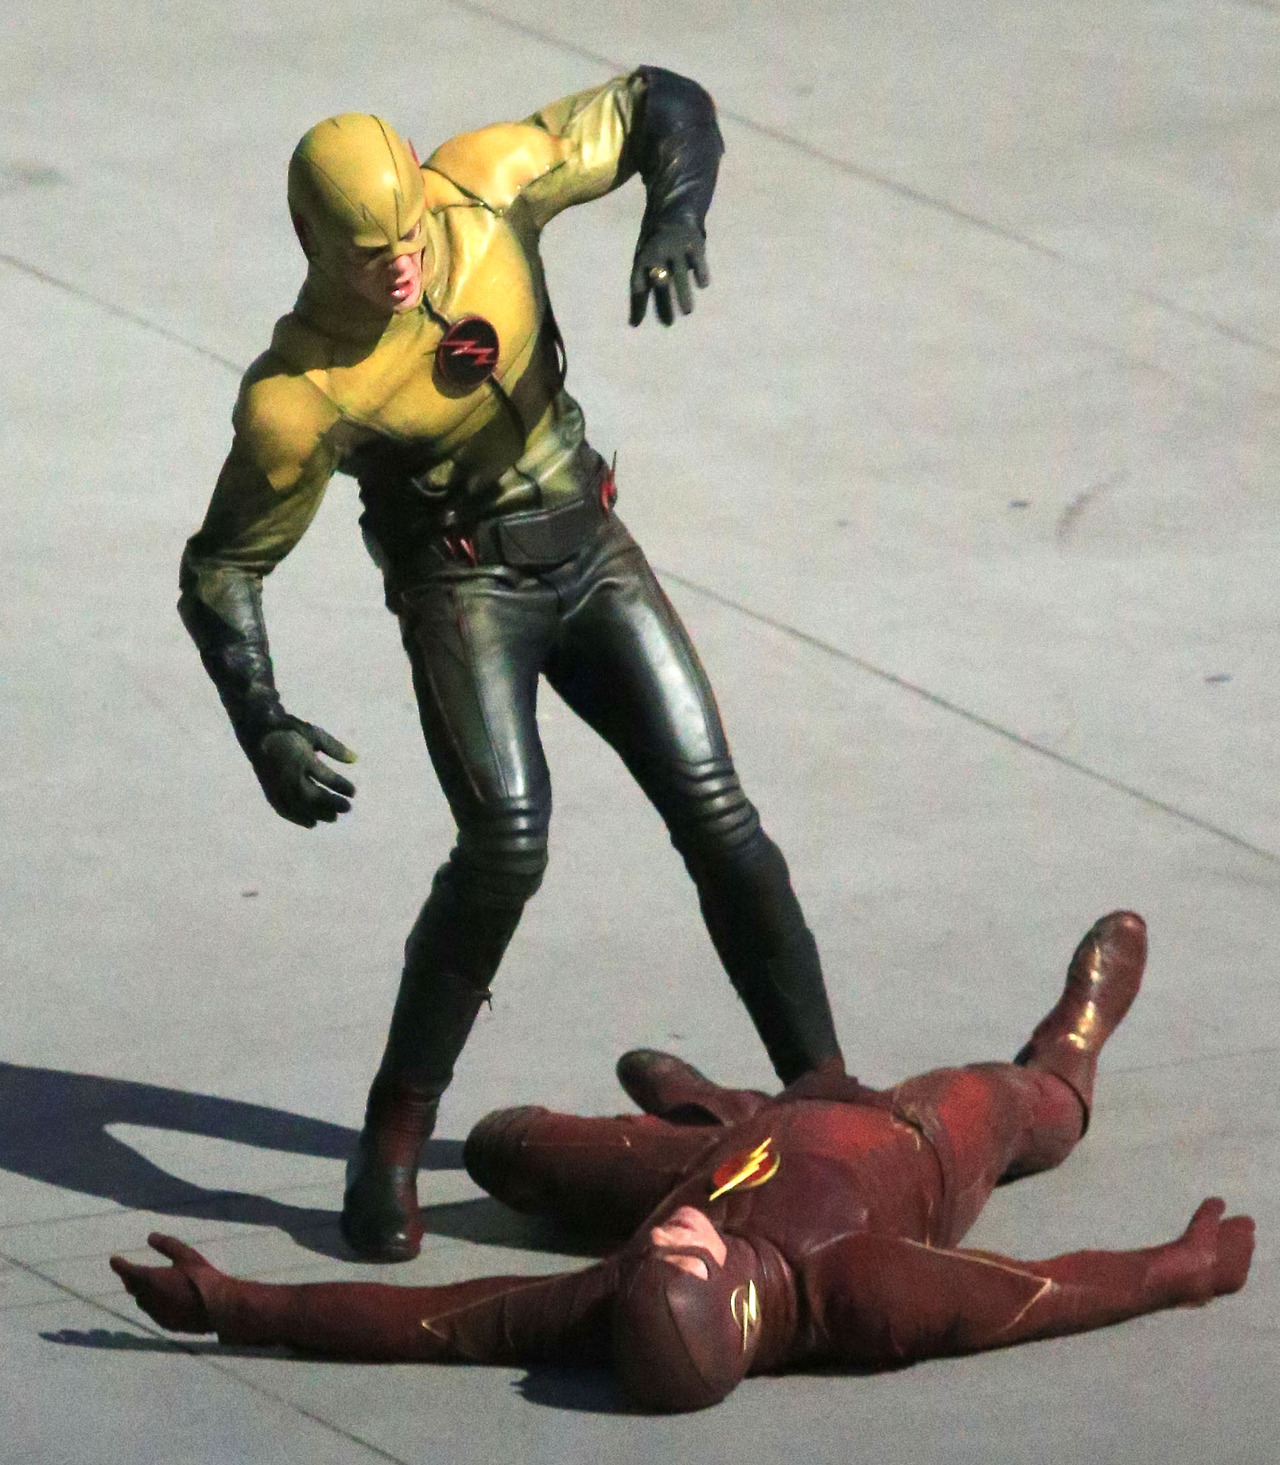 The Flash - First Look - Reverse-Flash/Prof. Zoom Costume - Set Photos